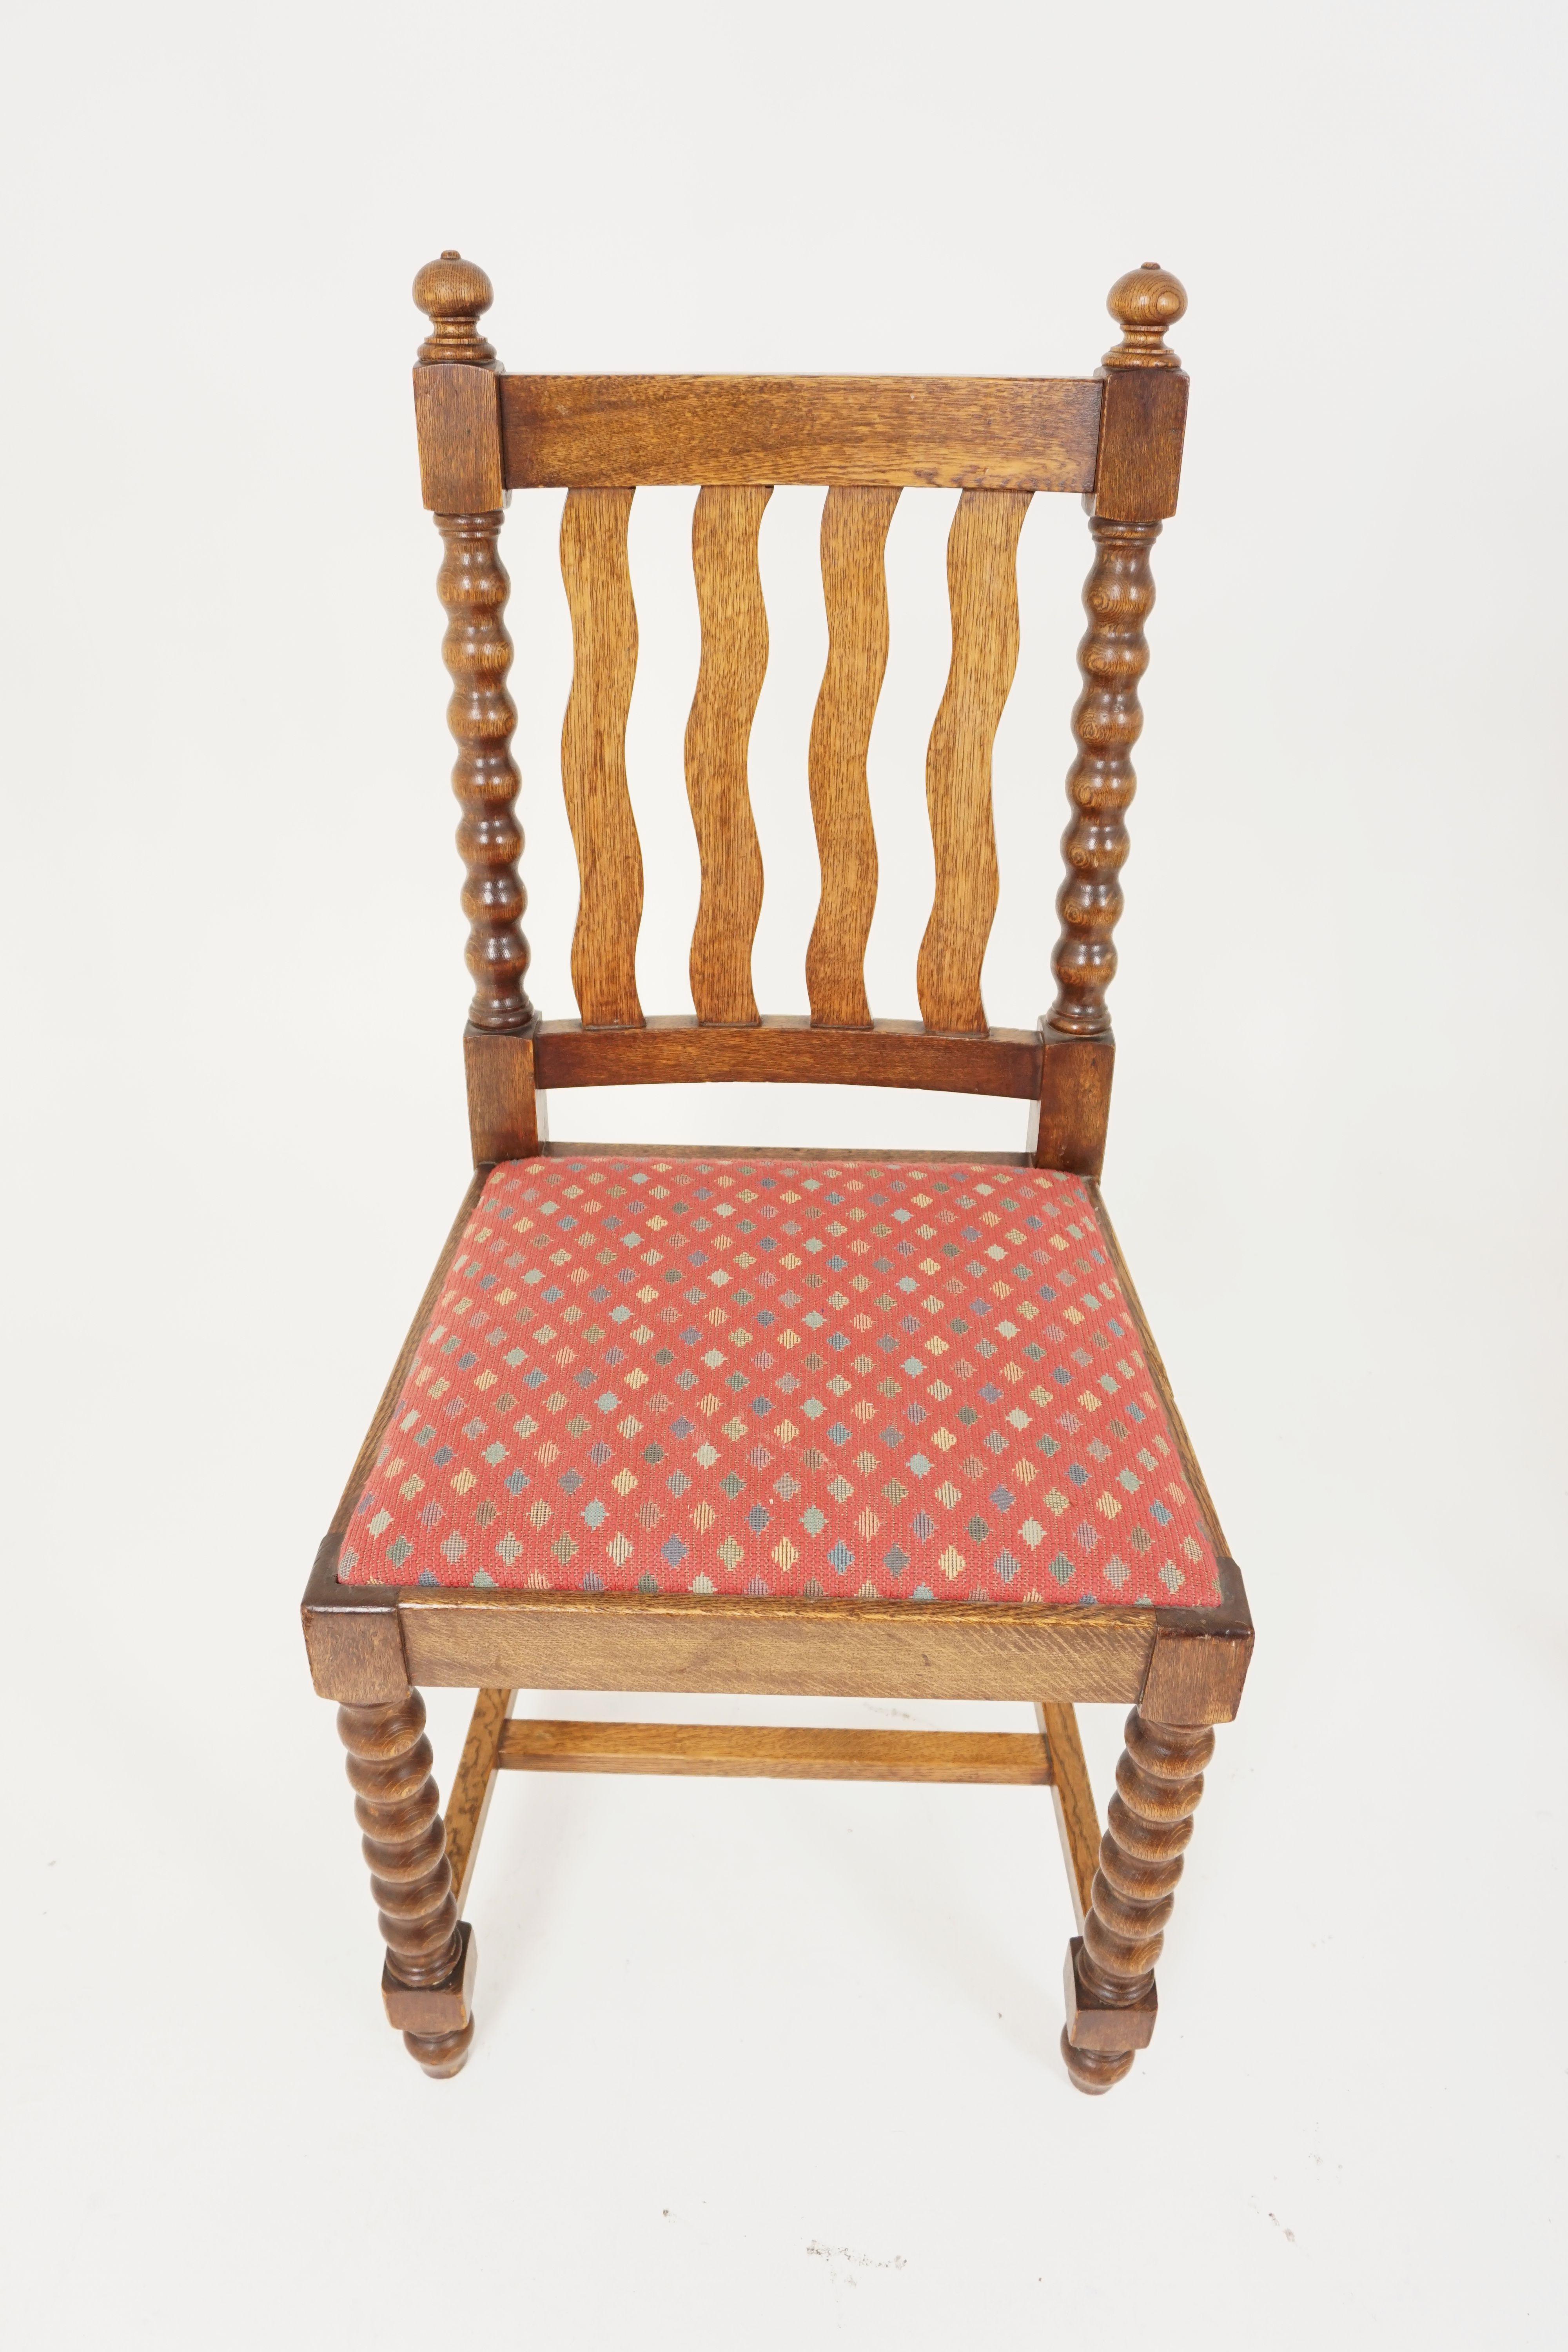 Four (4) antique oak bobbin leg dining chairs, oak, Scotland 1920, B839

Scotland, 1920
Solid oak
Original finish
Finials to the top of the supports
Four wavy rails on the open back
Lift-out padded seats below
All standing on bobbin legs to